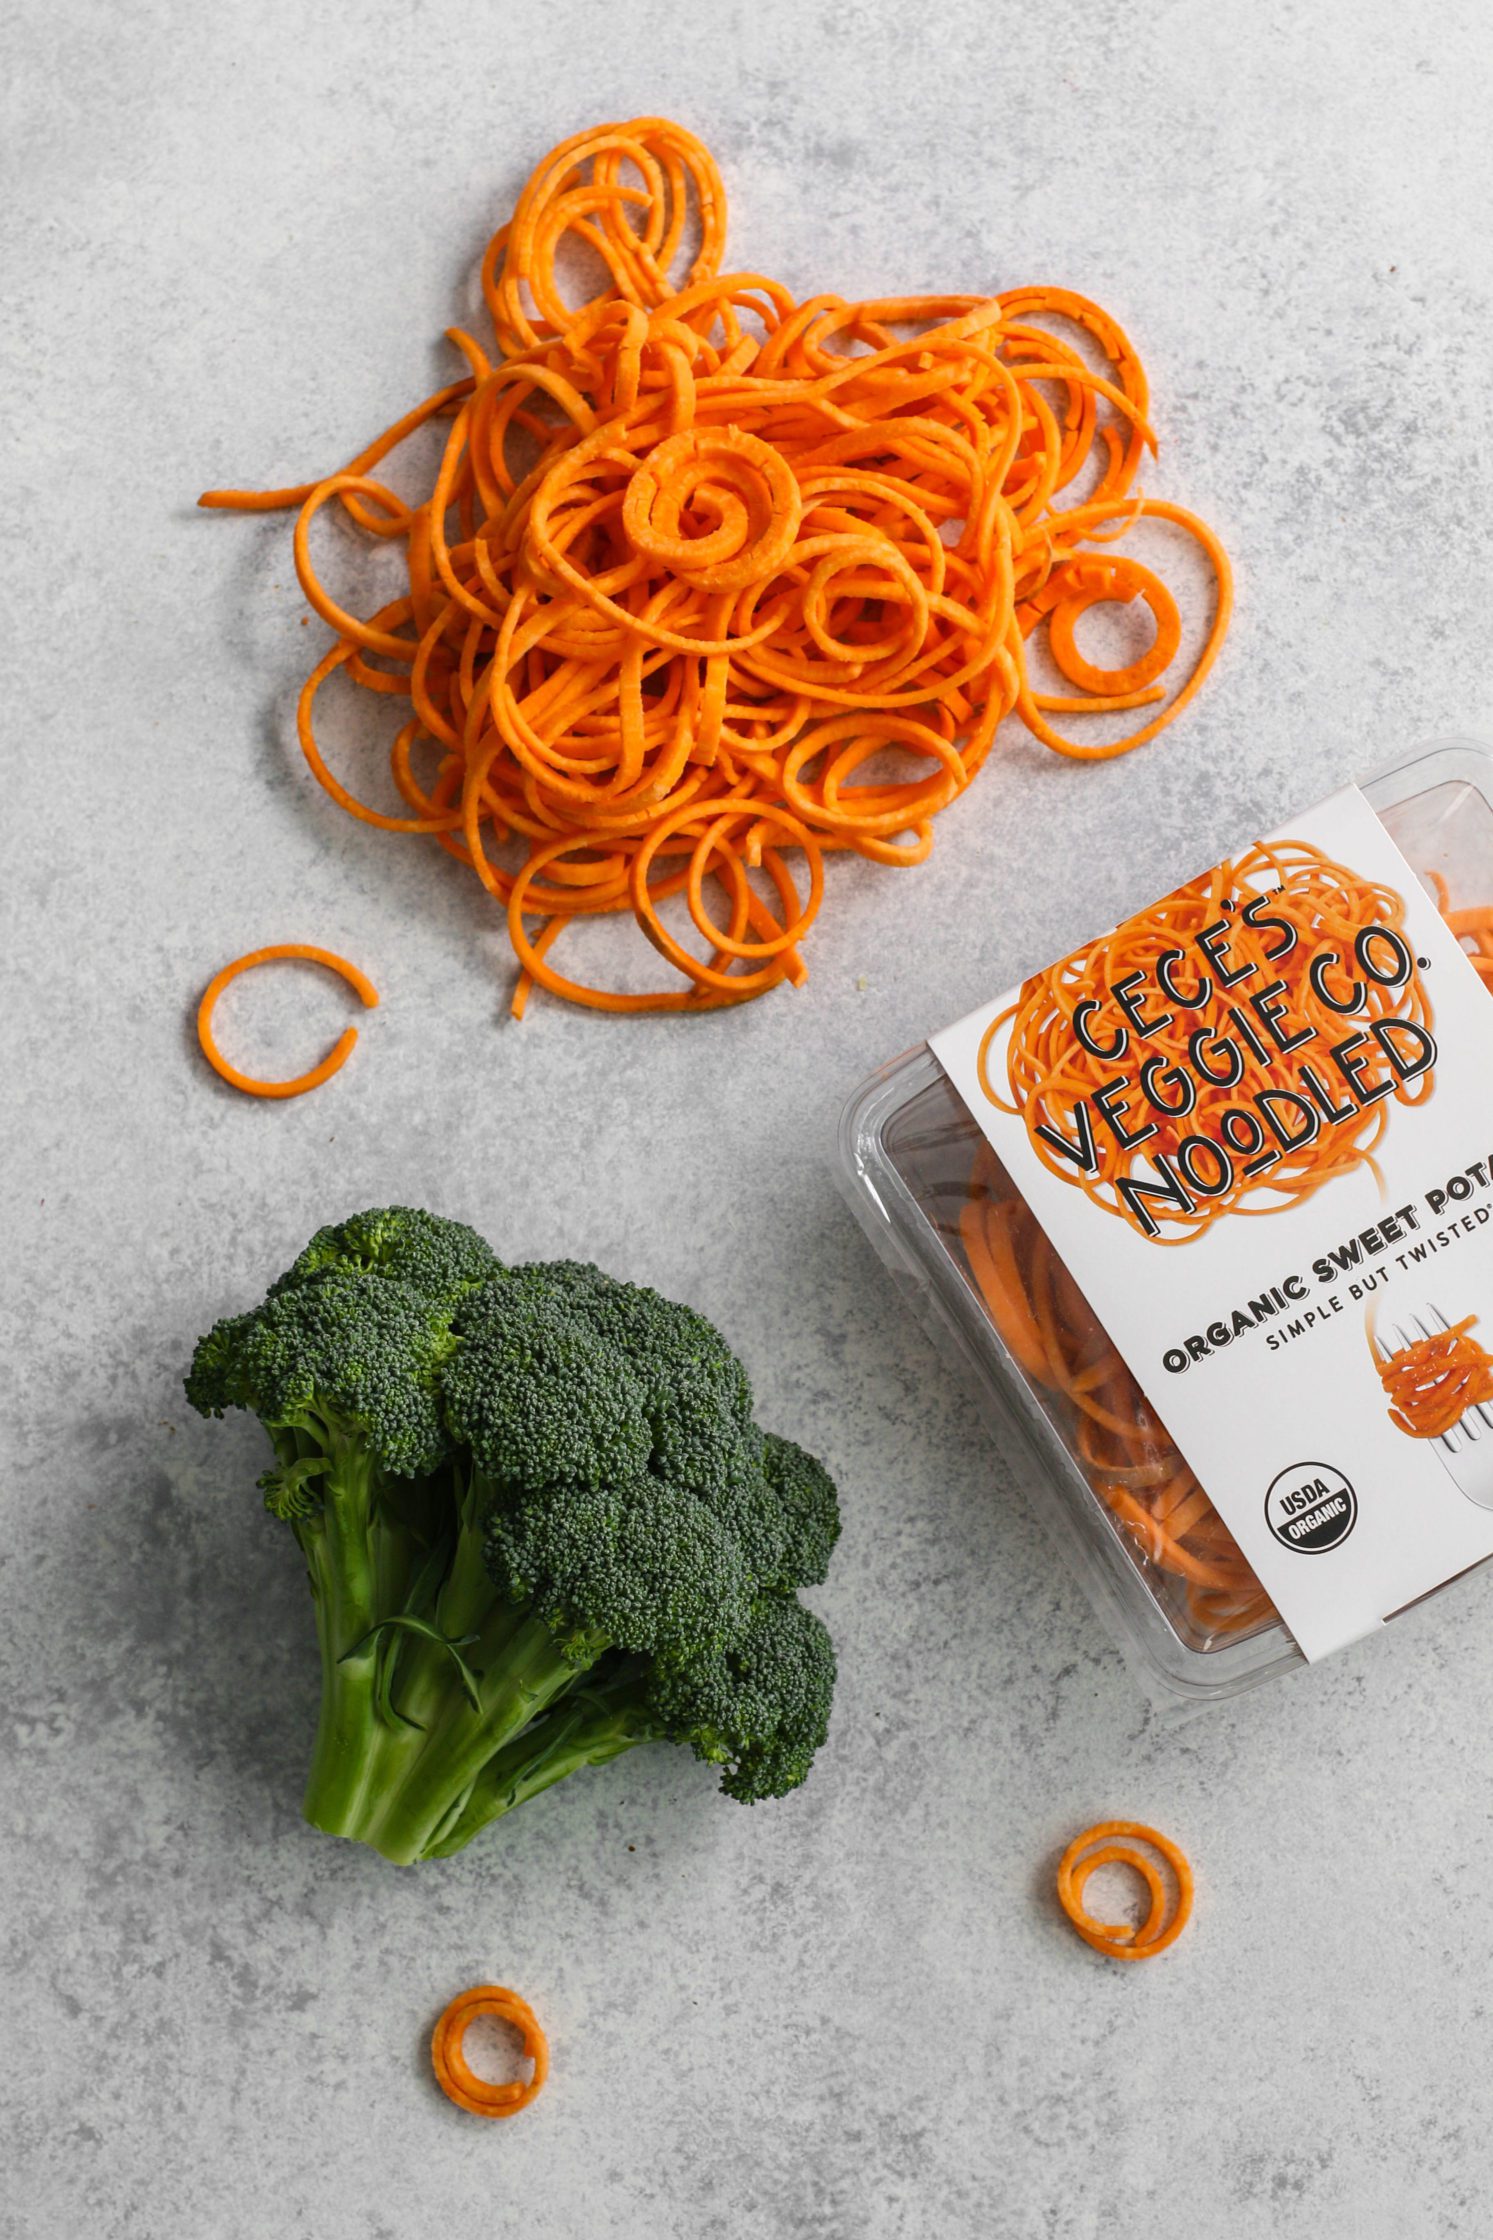 sweet potato noodles and head of broccoli by Flora & Vino